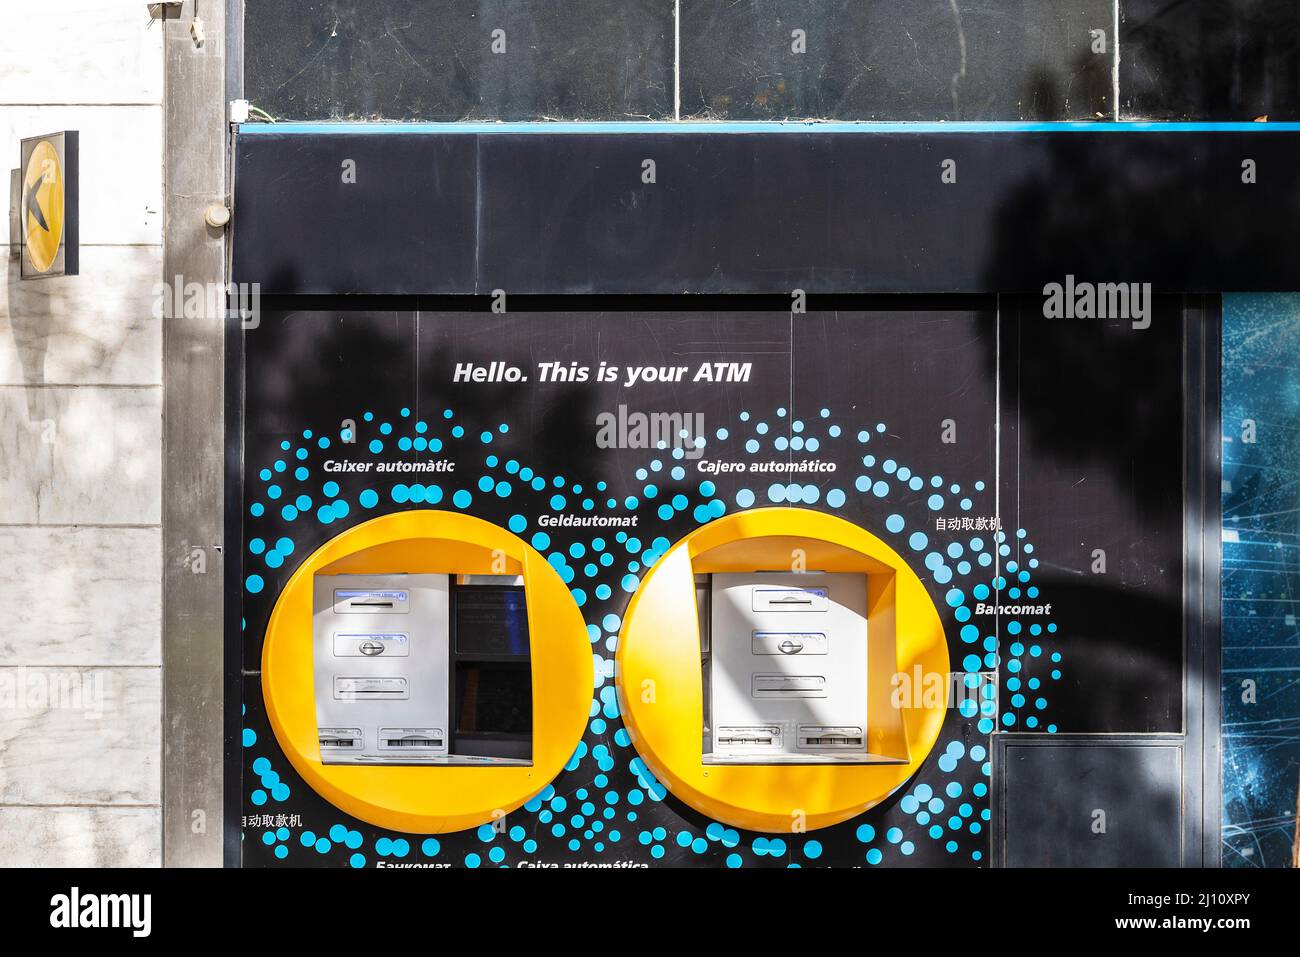 Barcelona, Spain - February 24, 2022: ATM Cash Machine of Caixabank in several languages in Barcelona, Catalonia, Spain Stock Photo